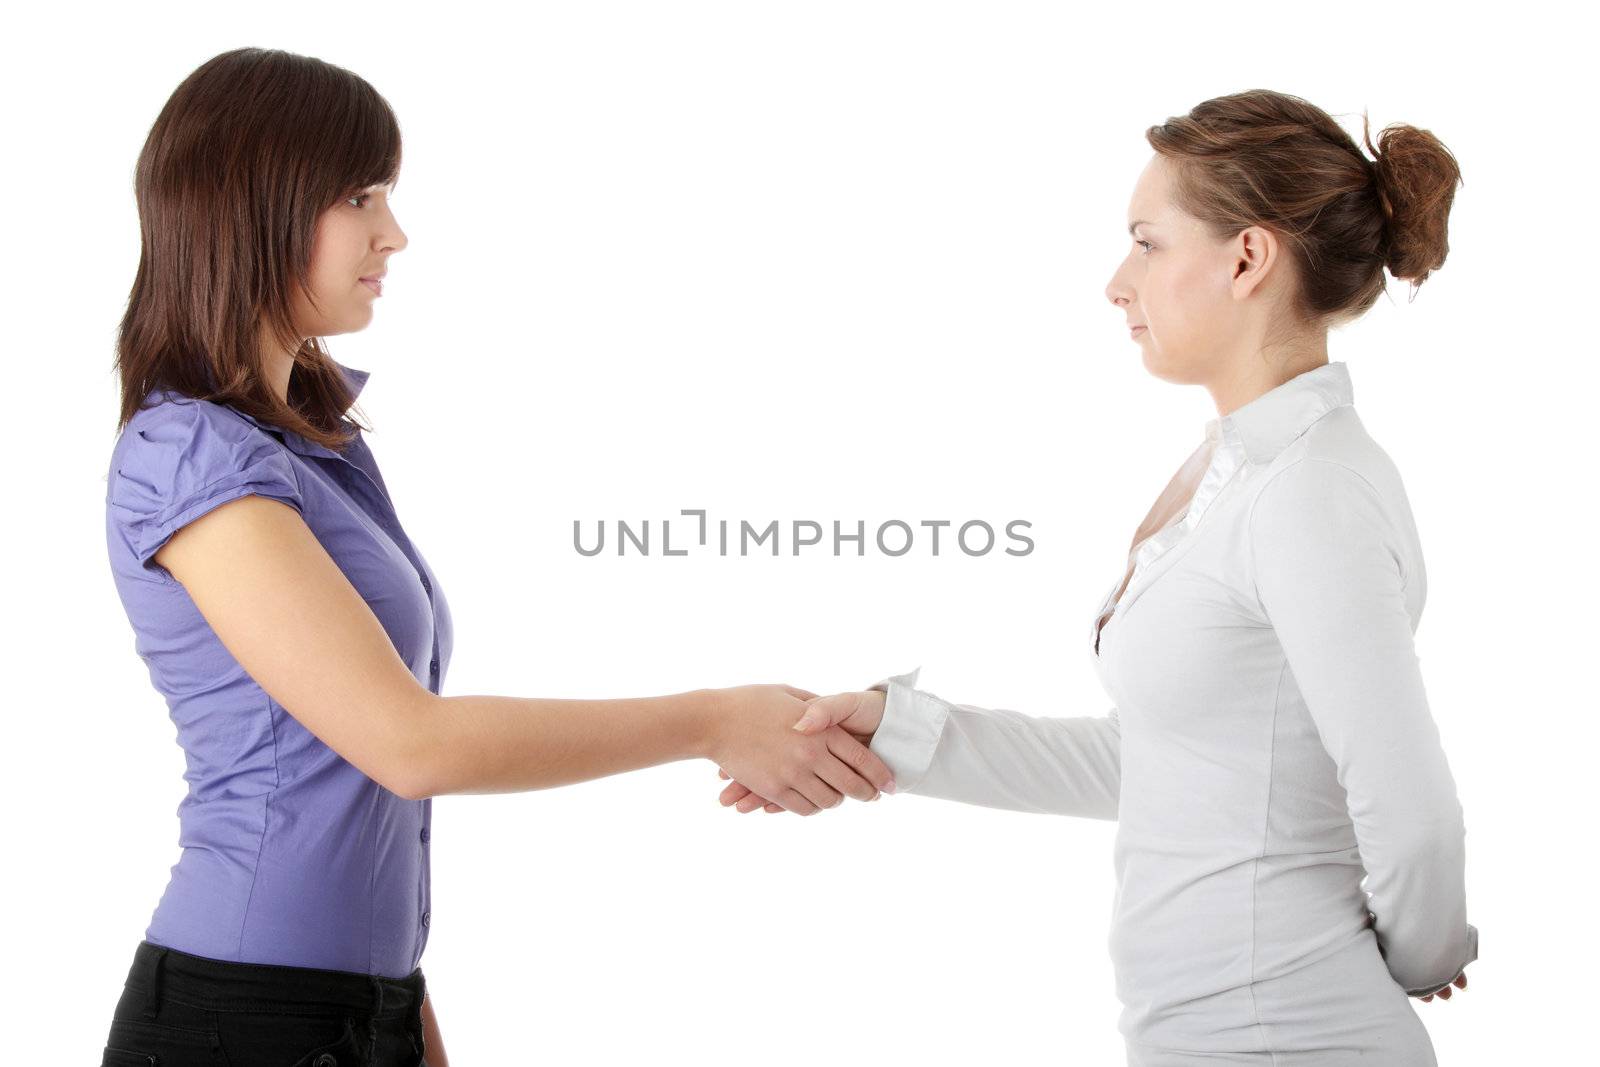 Business hand shake between two colleagues woman